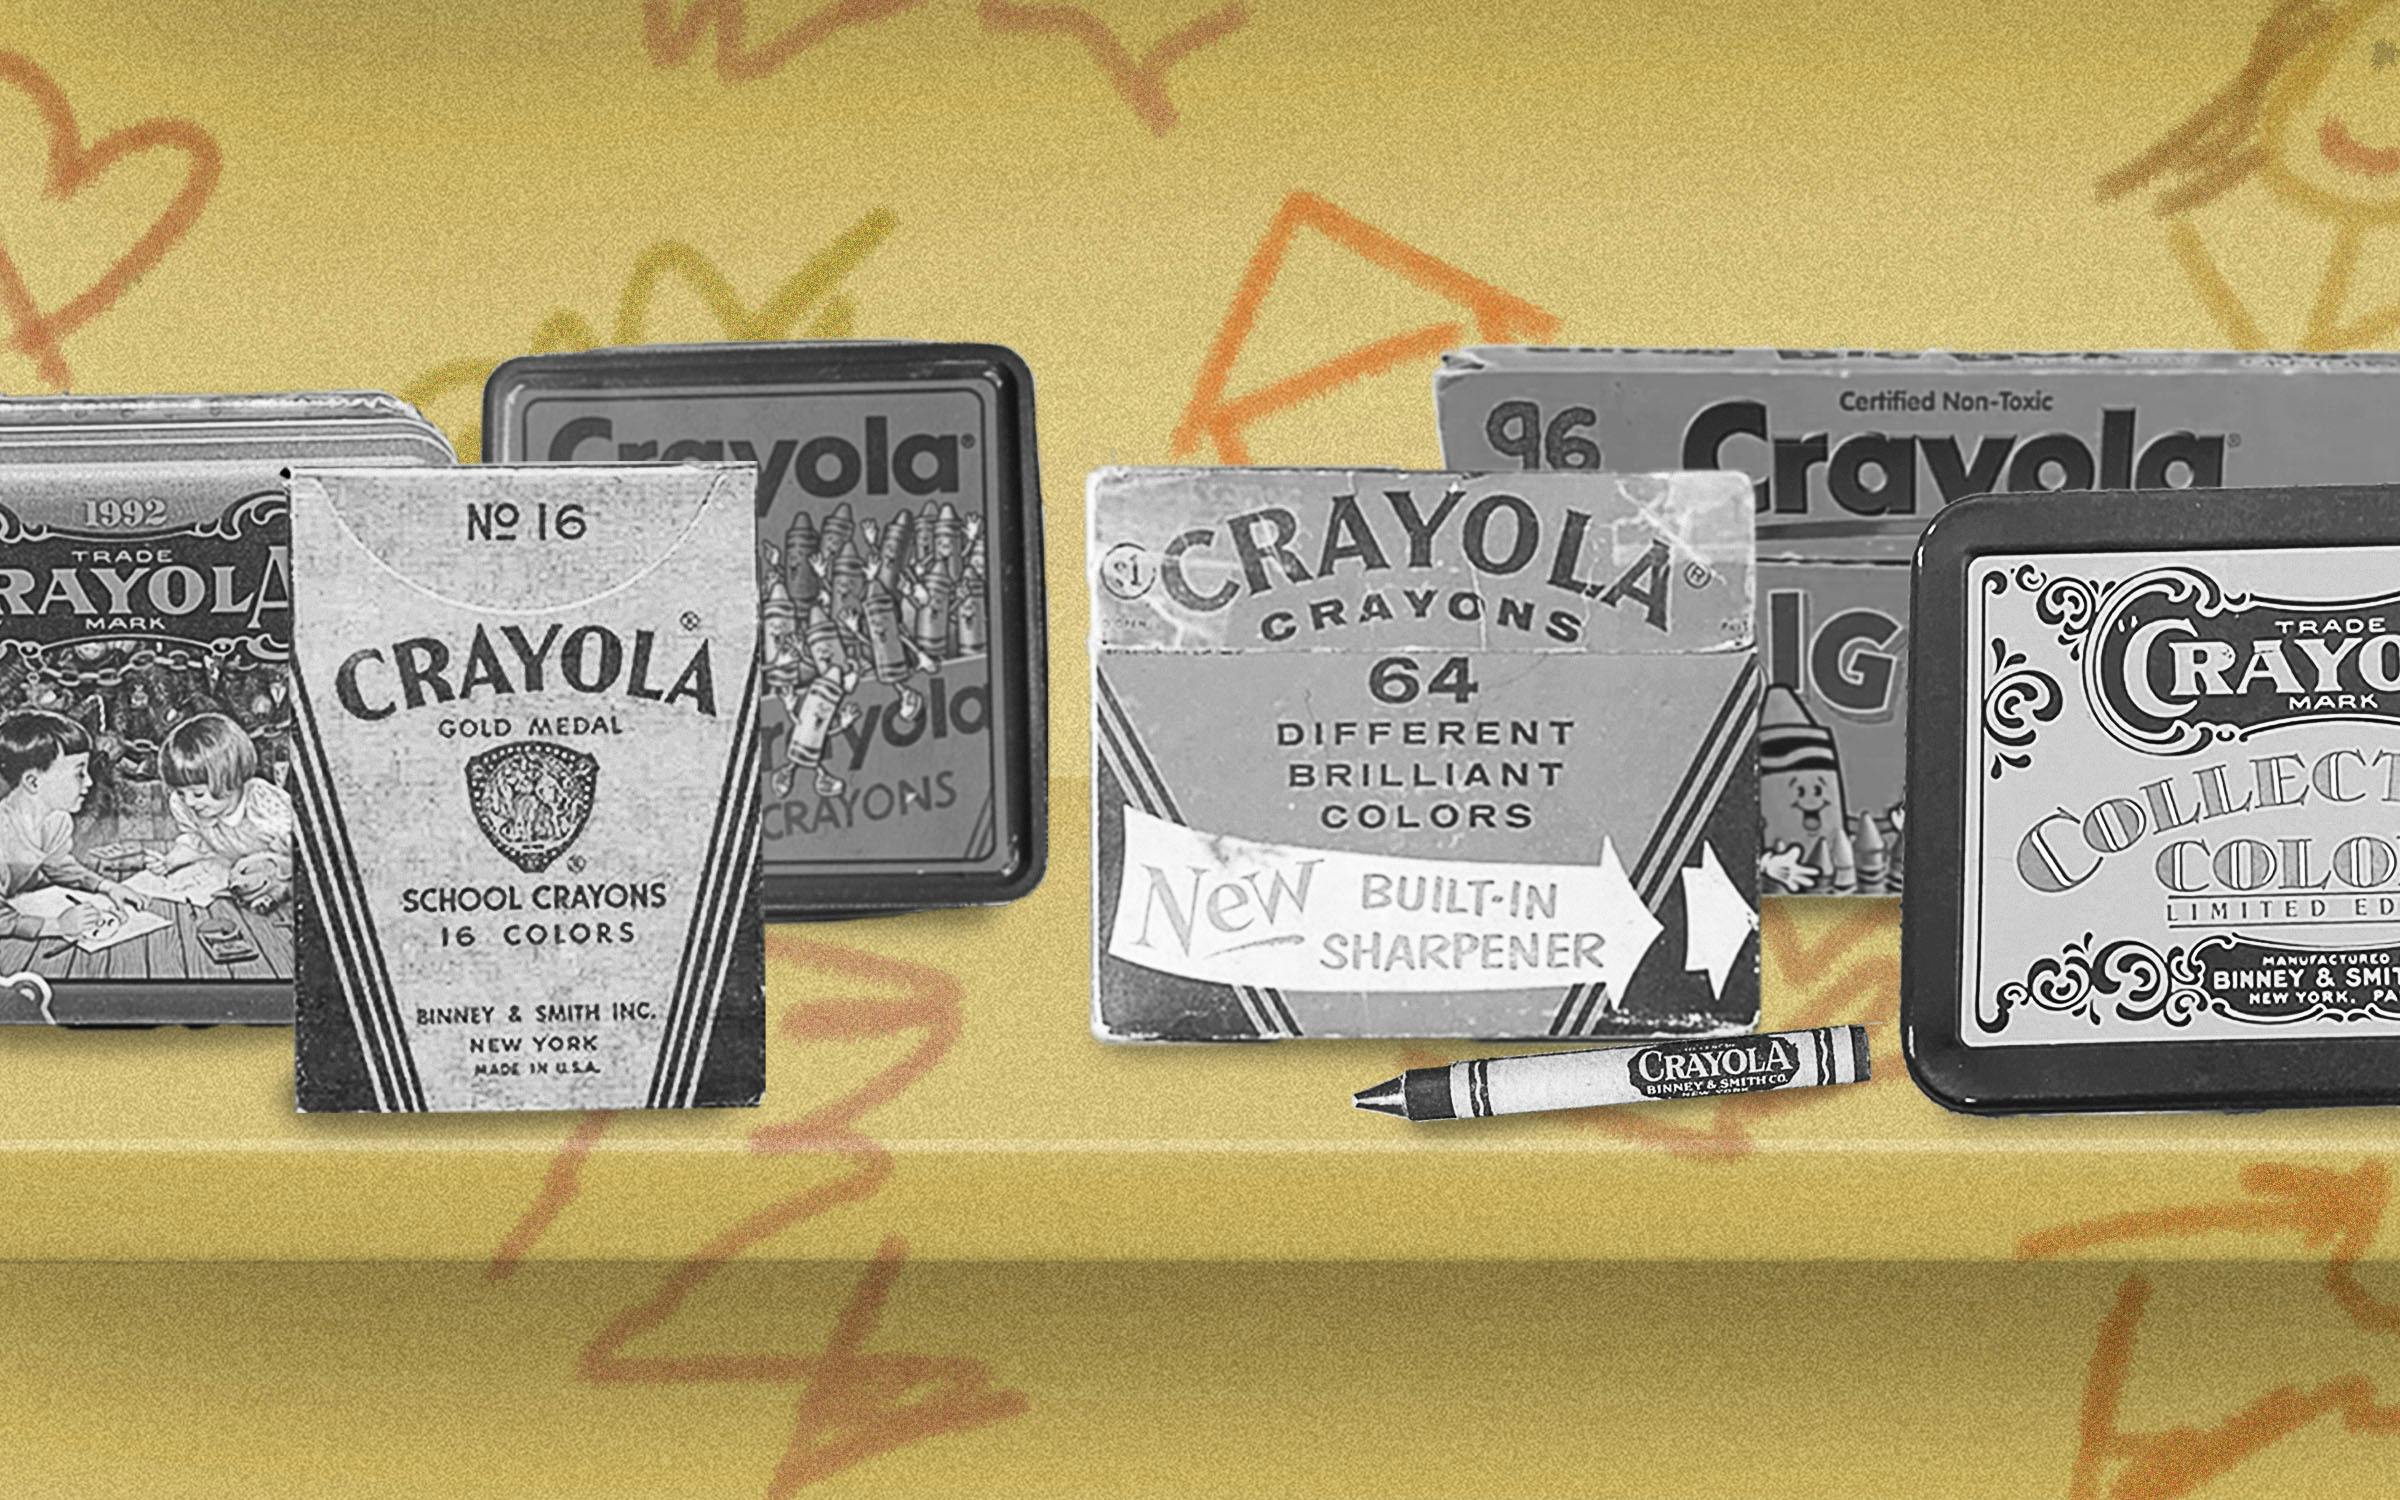 Crayola Has Expanded Its Colors of the World Collection to Include